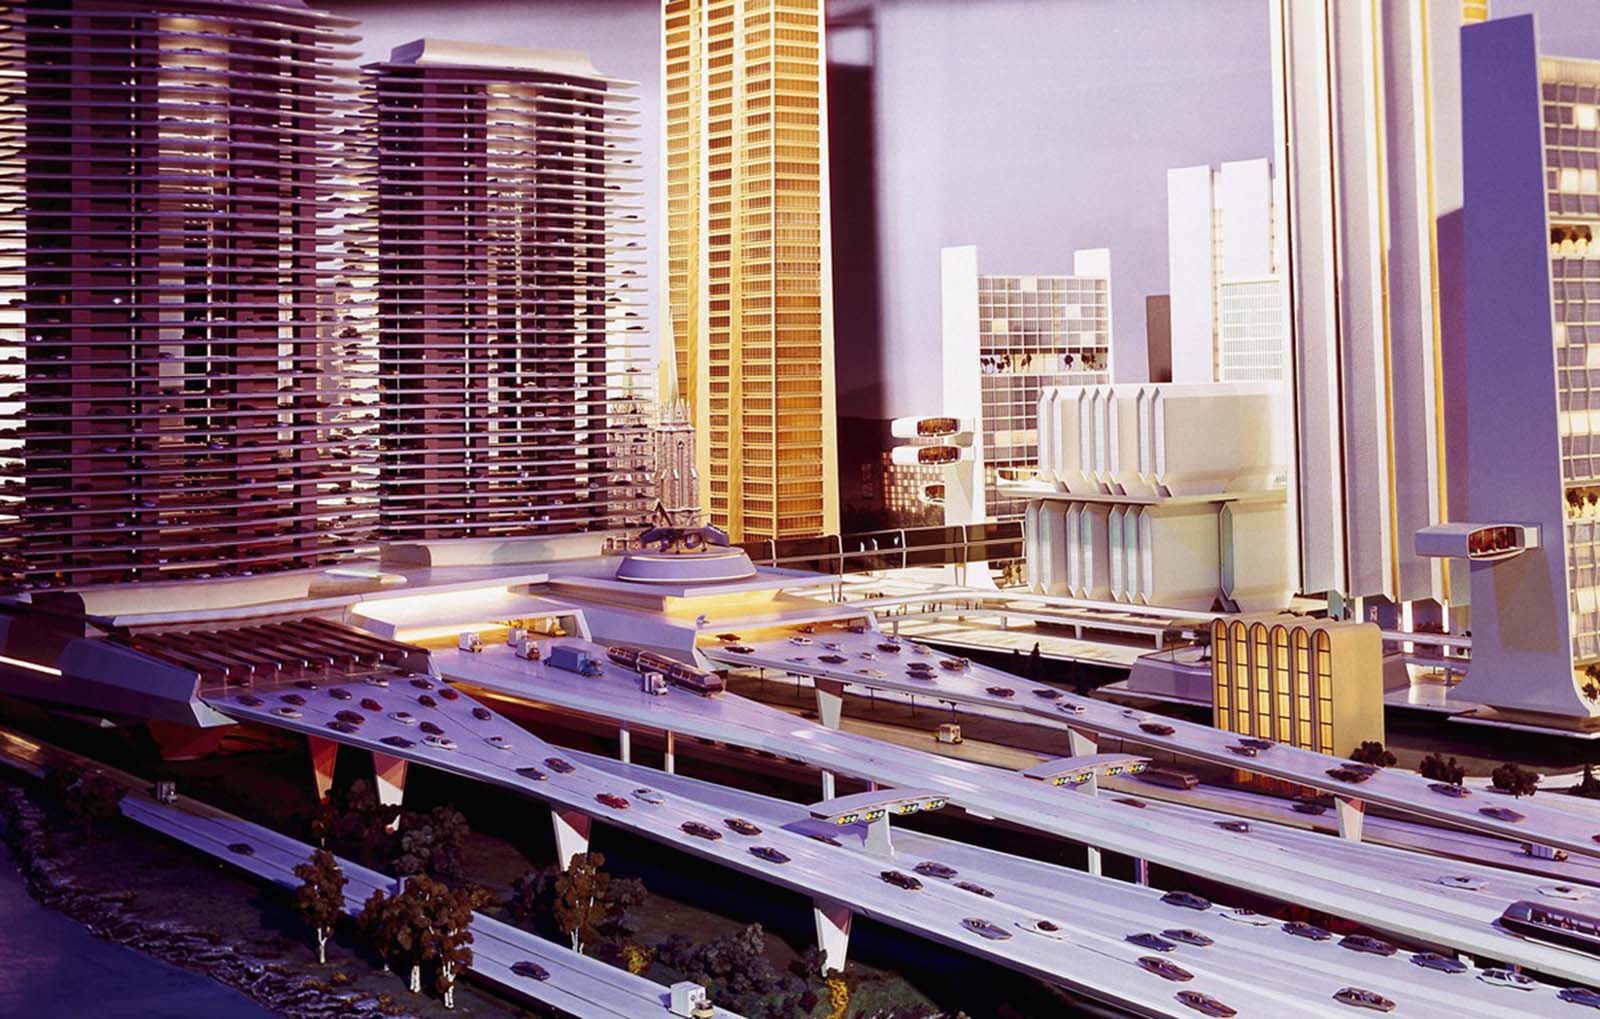 The city of the future, part of GM's Futurama exhibit at the World's Fair.